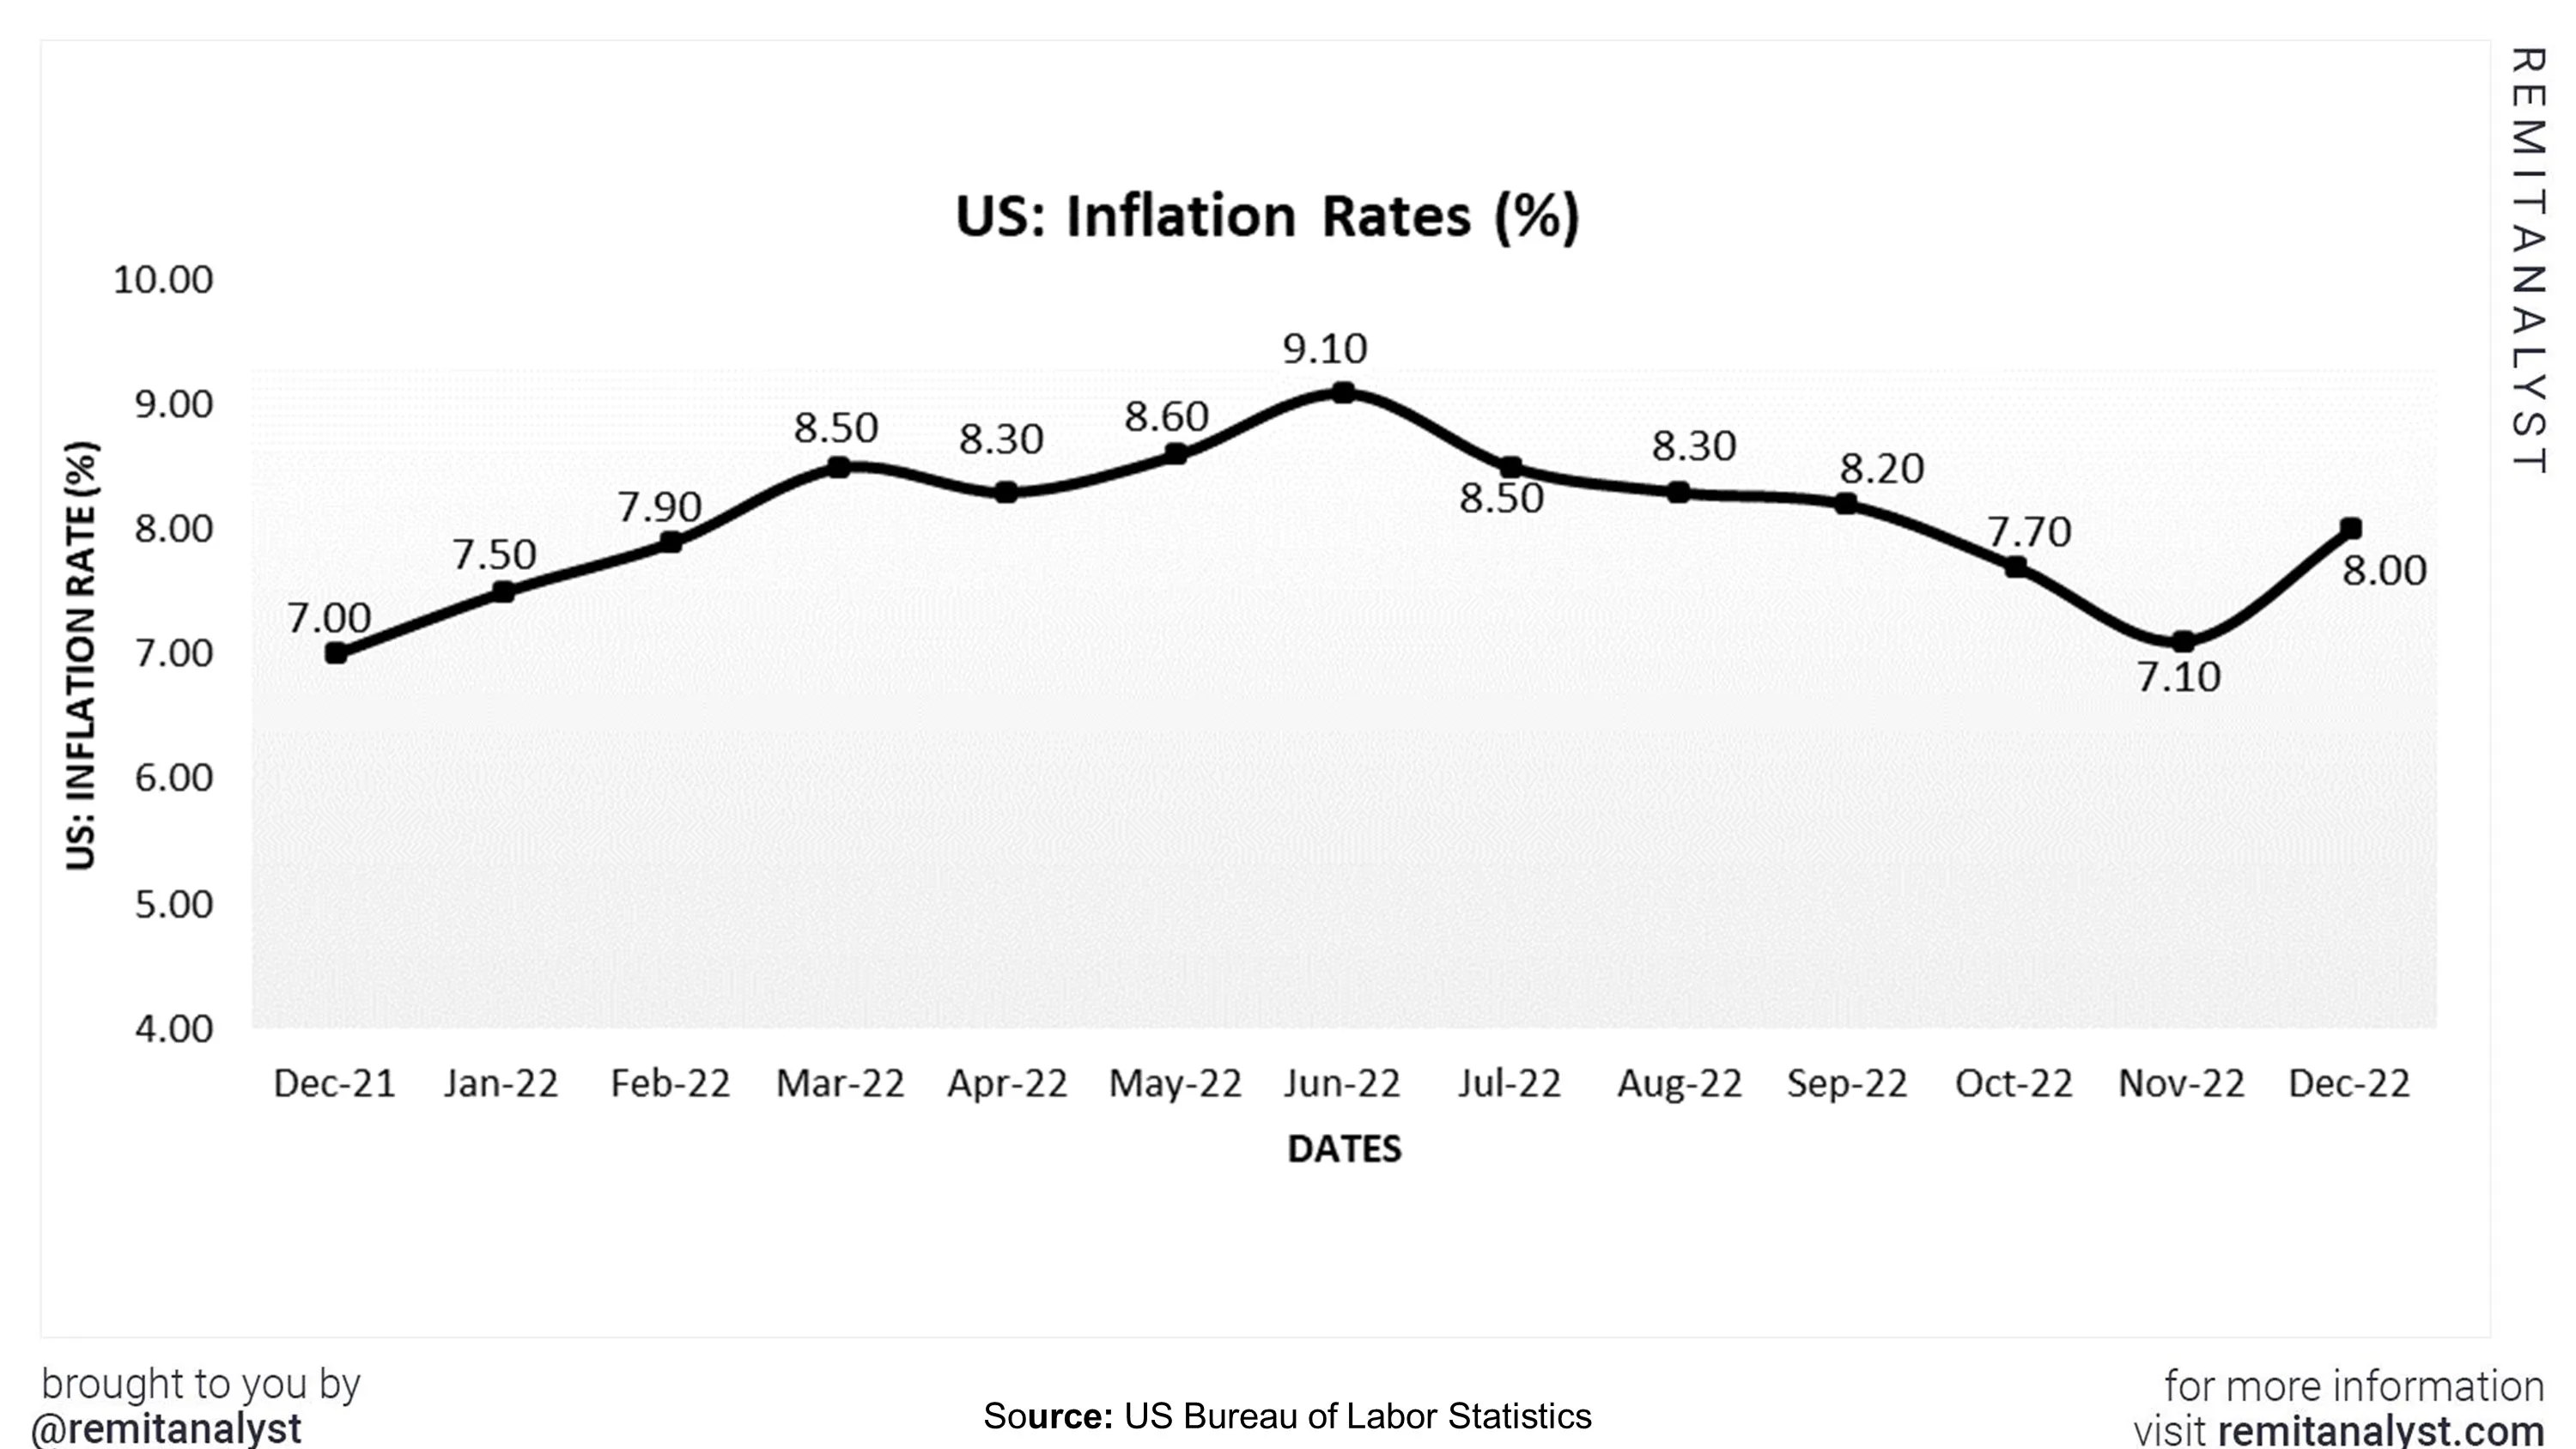 inflation-rates-in-us-from-dec-2021-to-dec-2022